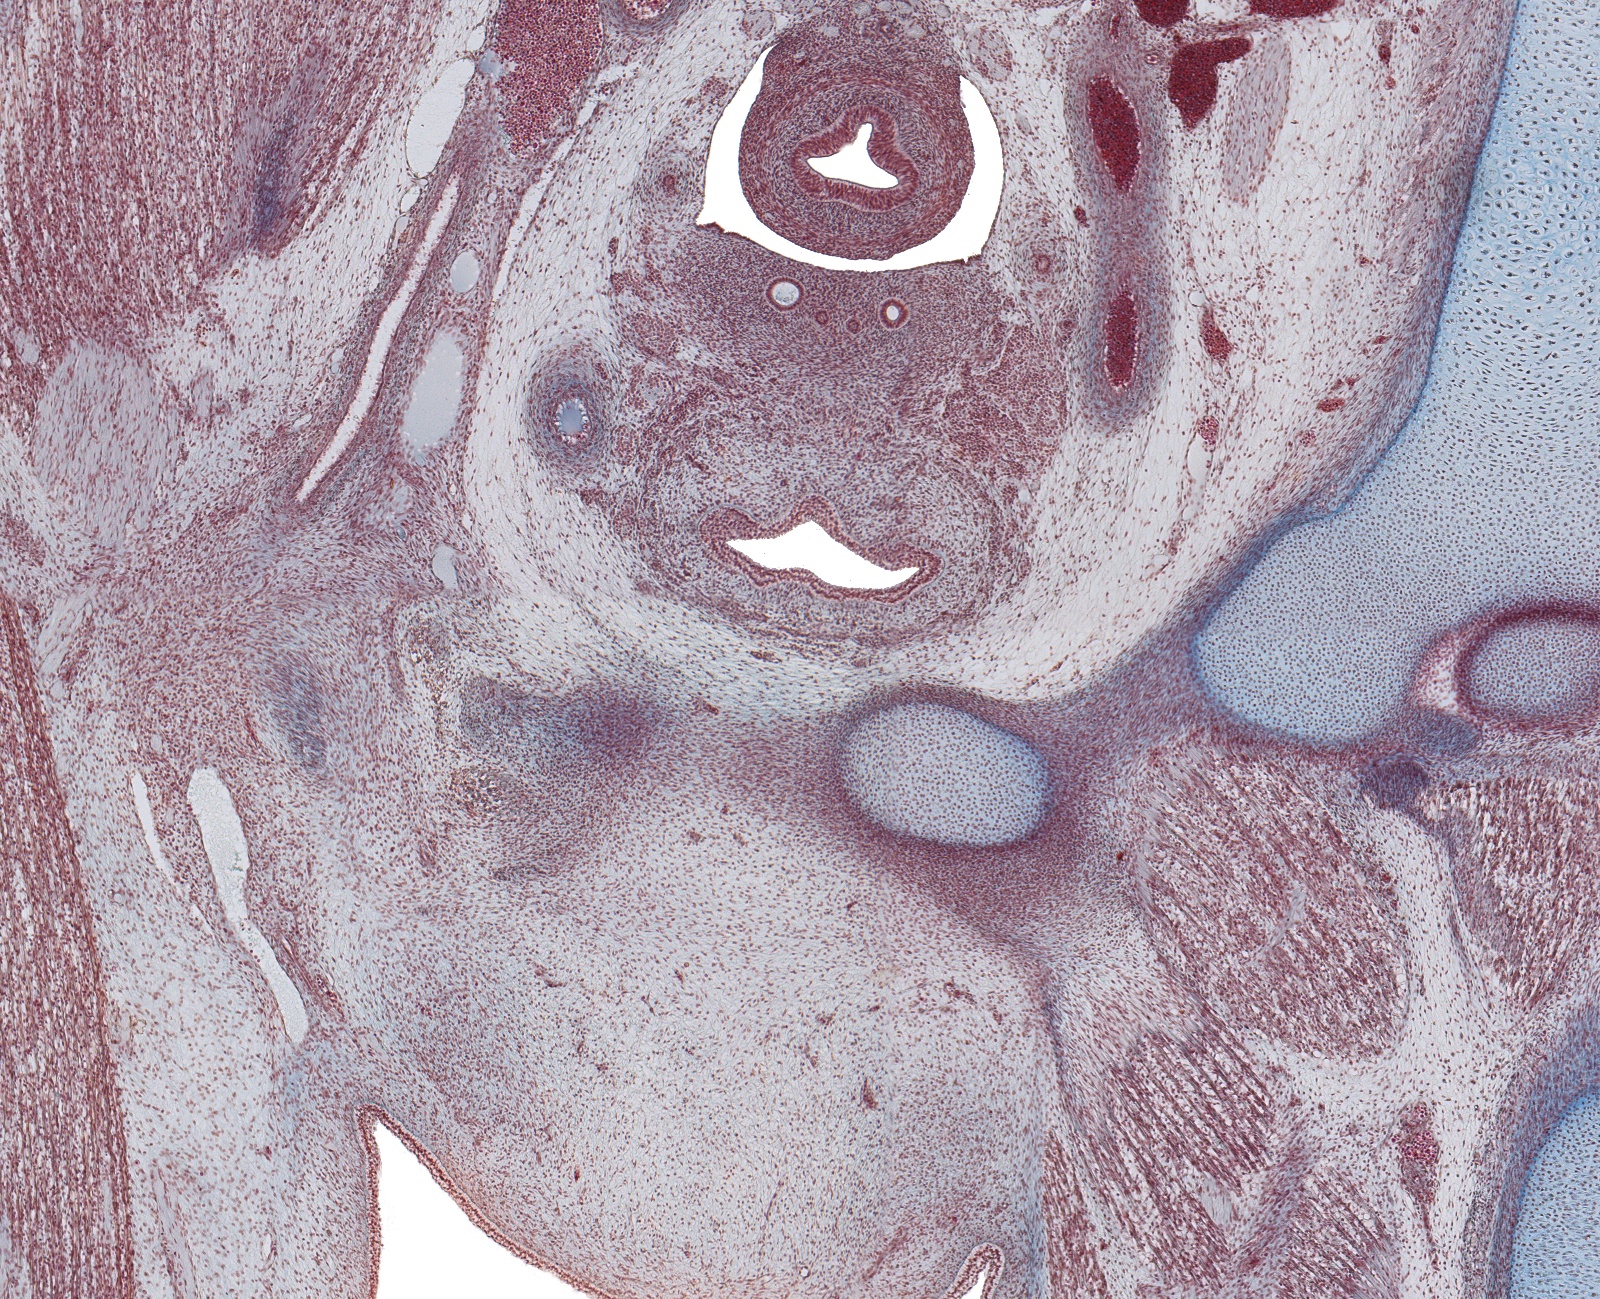 Paramesenephric Ducts, and Gubernaculum Testis in Scrotal Fold